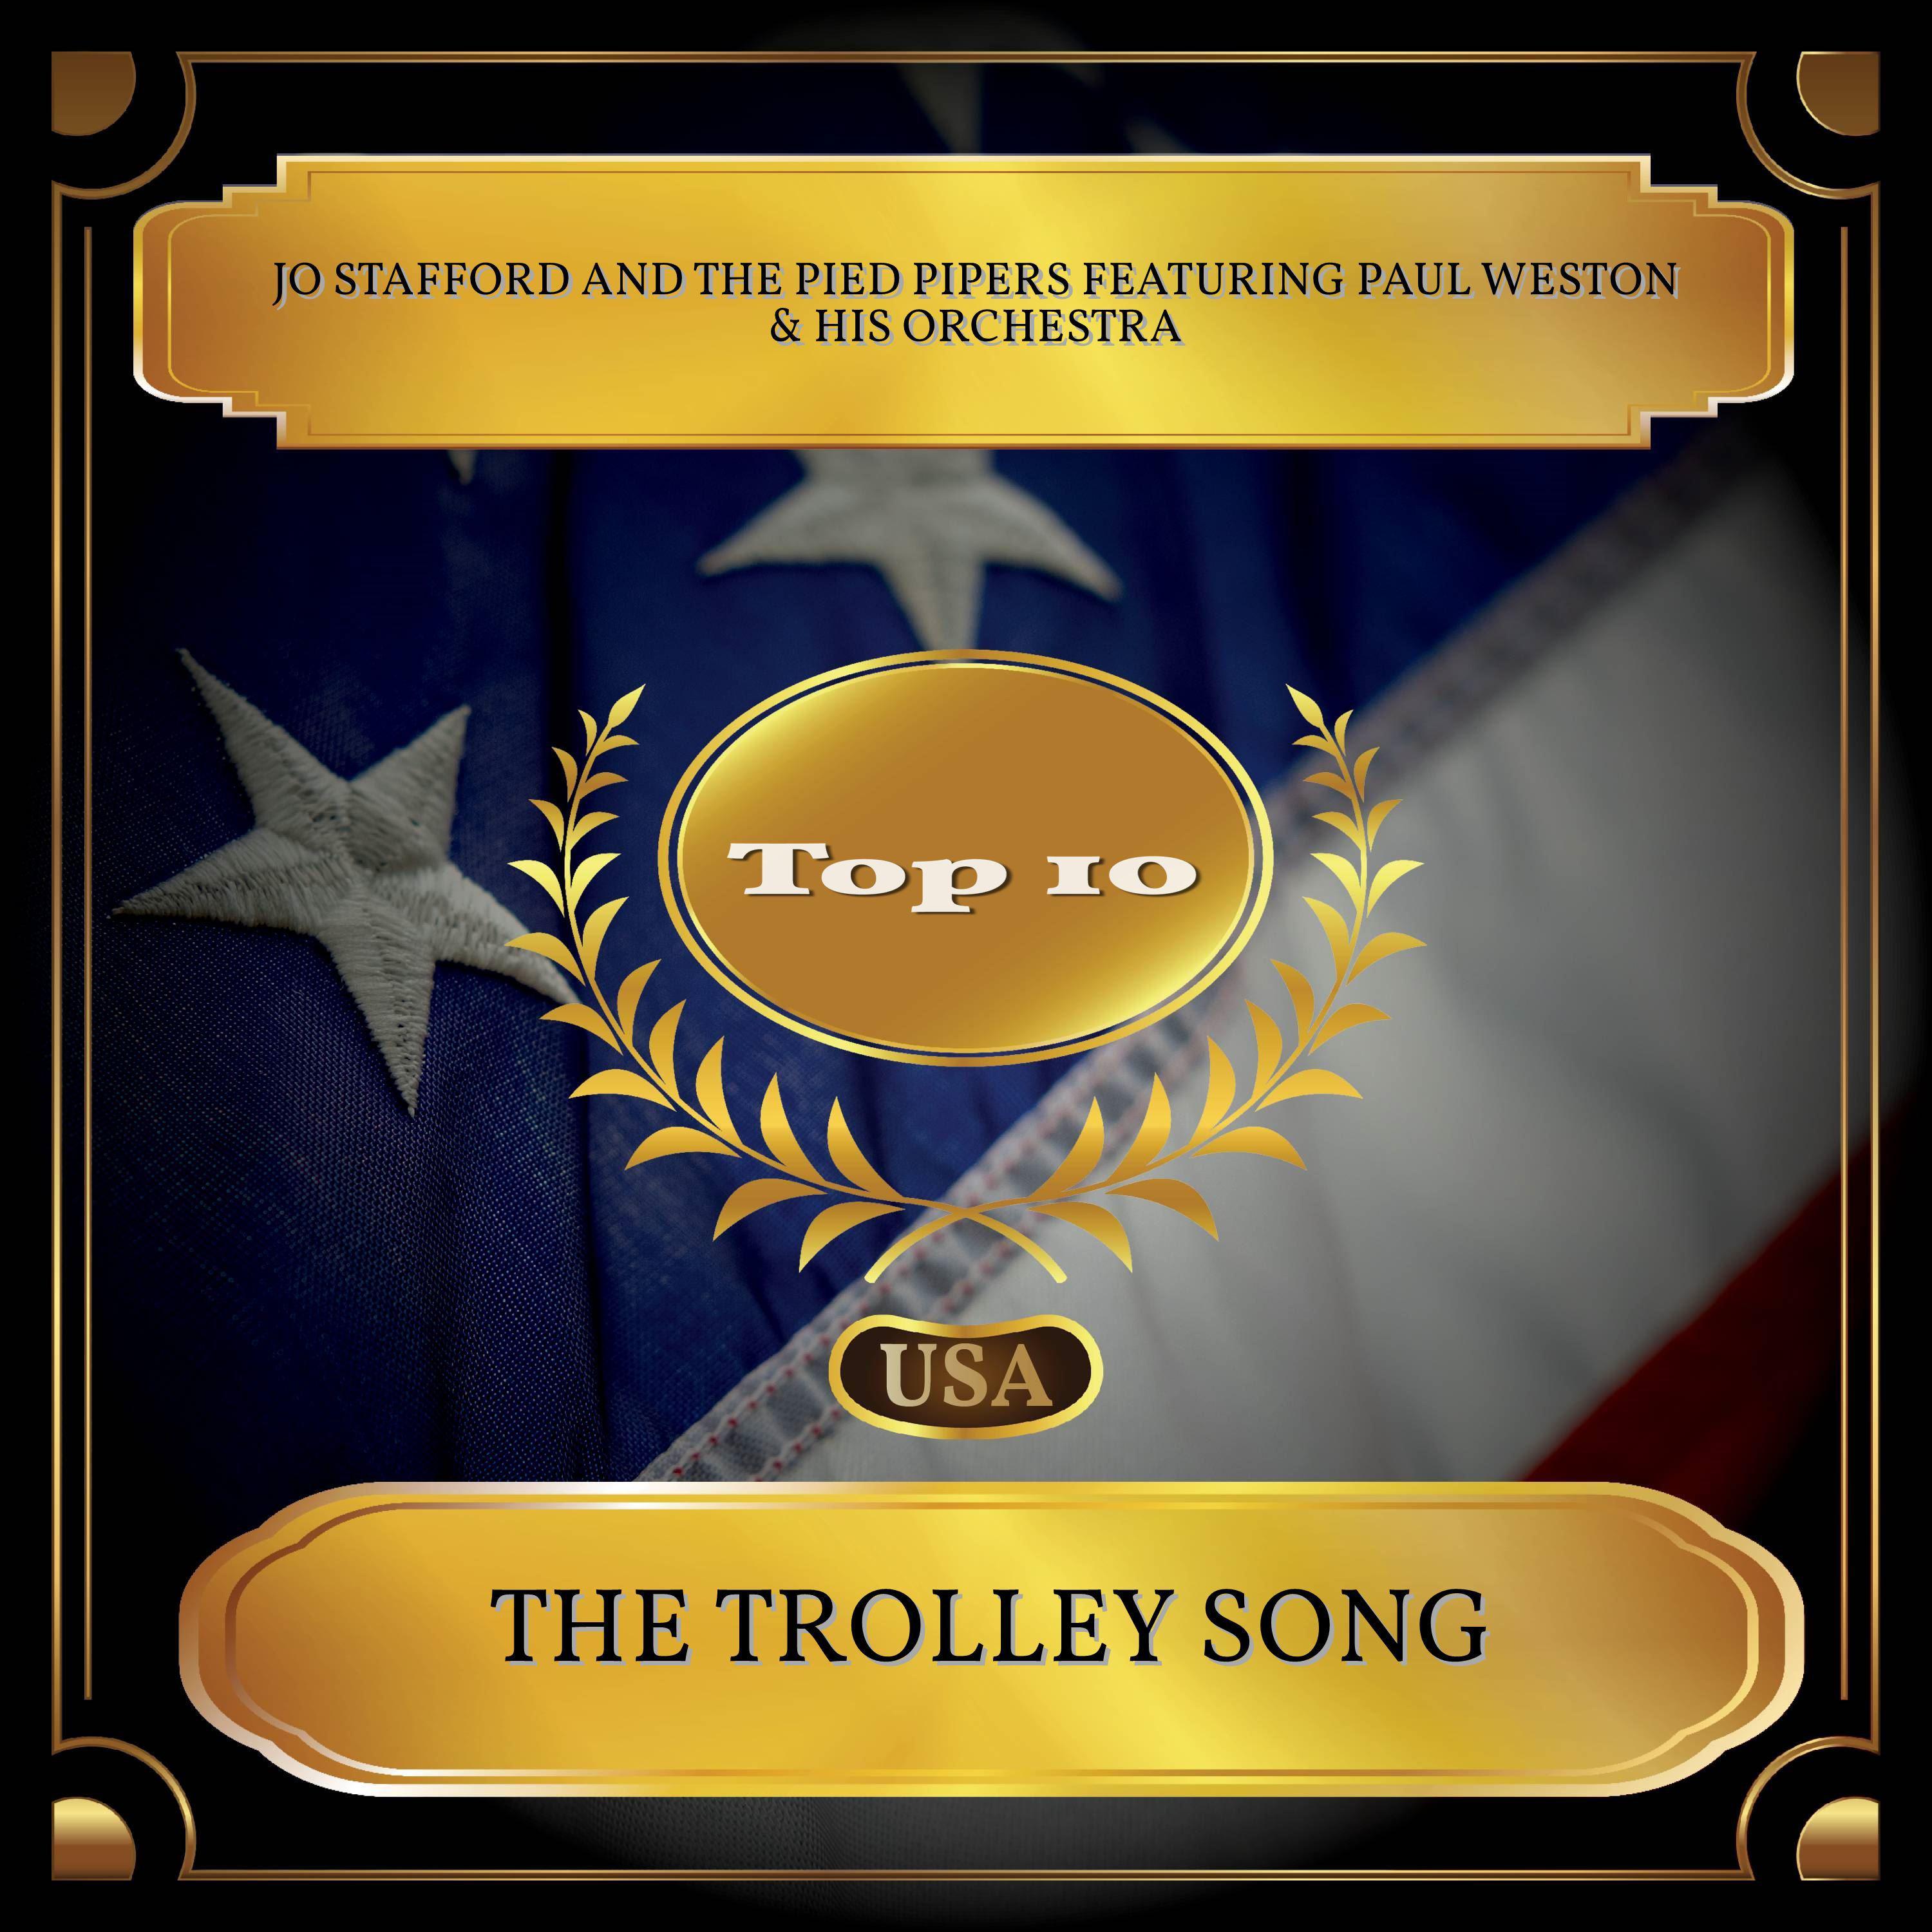 The Trolley Song (Billboard Hot 100 - No. 02)